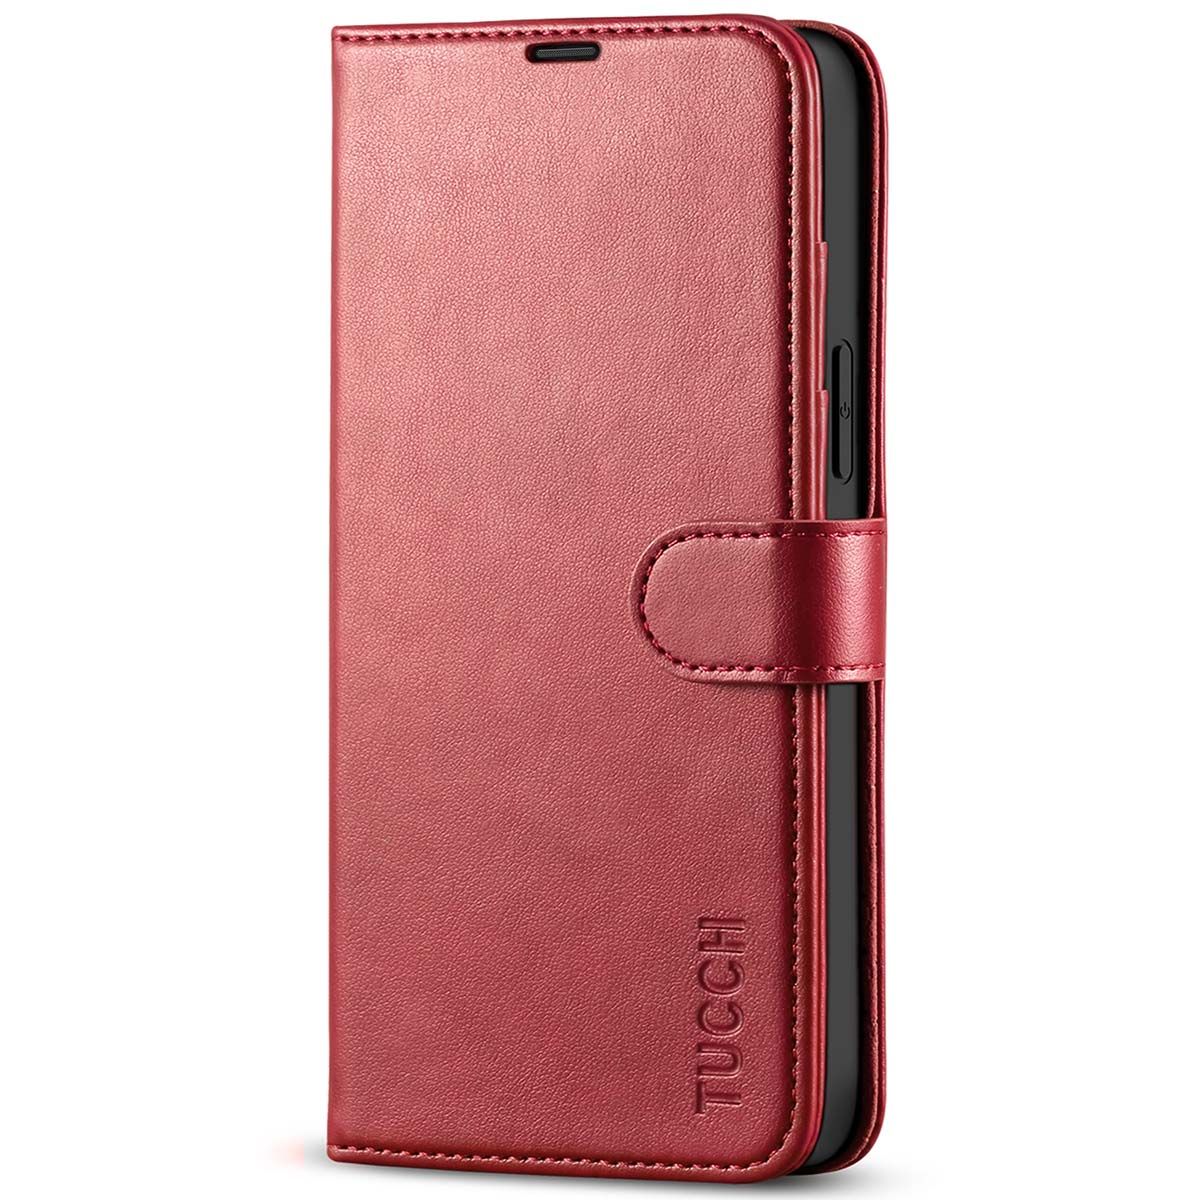 TUCCH Case for iPhone 13 Pro 5G Card Slot Shockproof Flip Book Cover Rose Gold Compatible with iPhone 13 Pro 6.1-inch 2021 Kickstand PU Leather Folio Wallet with Protective TPU Interior Case